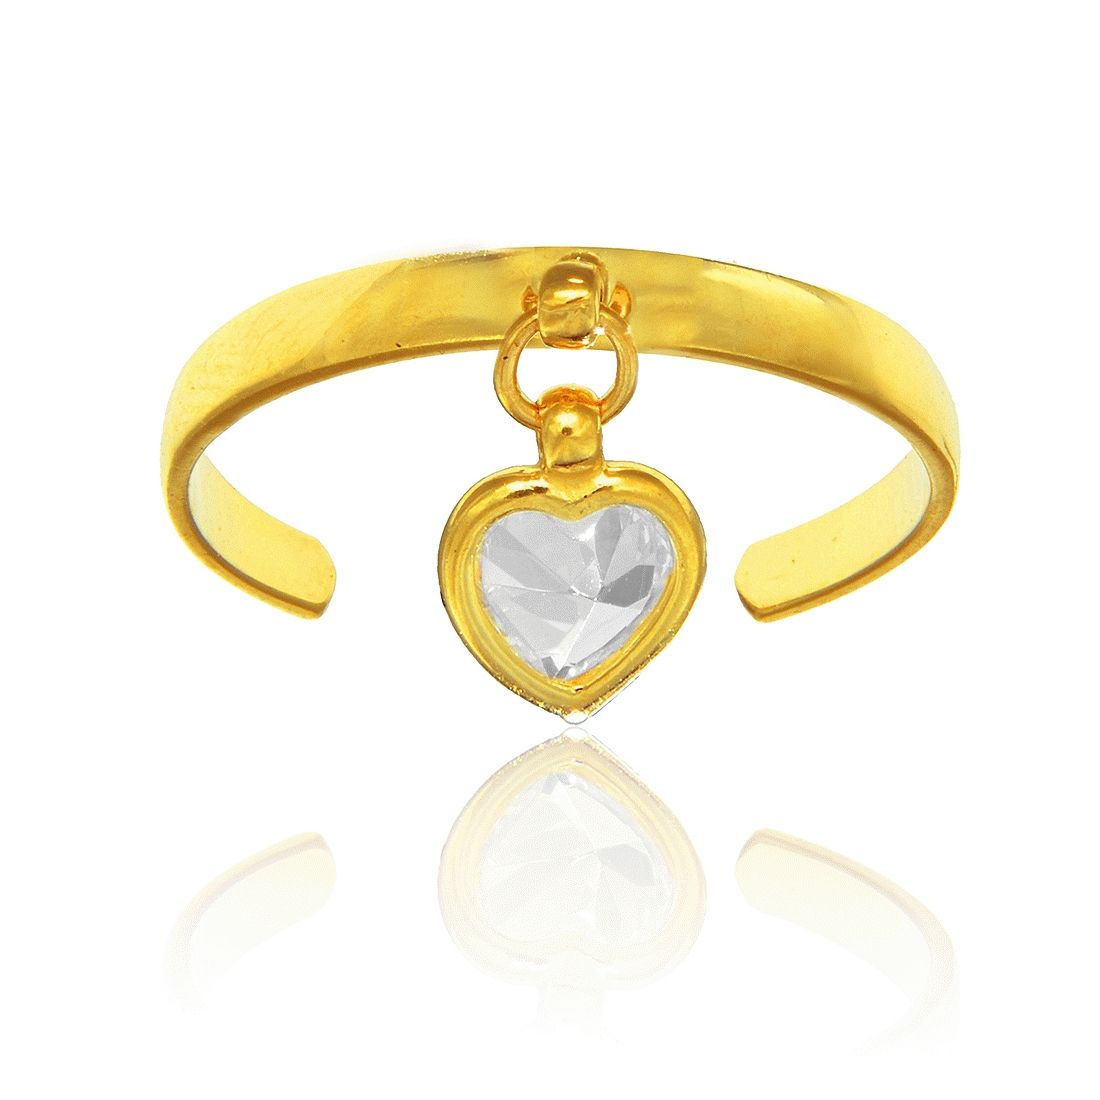 14k Yellow Gold Cz Dangle Heart Toe Ring Adjustable Regarding Most Current Heart Toe Rings (View 7 of 15)